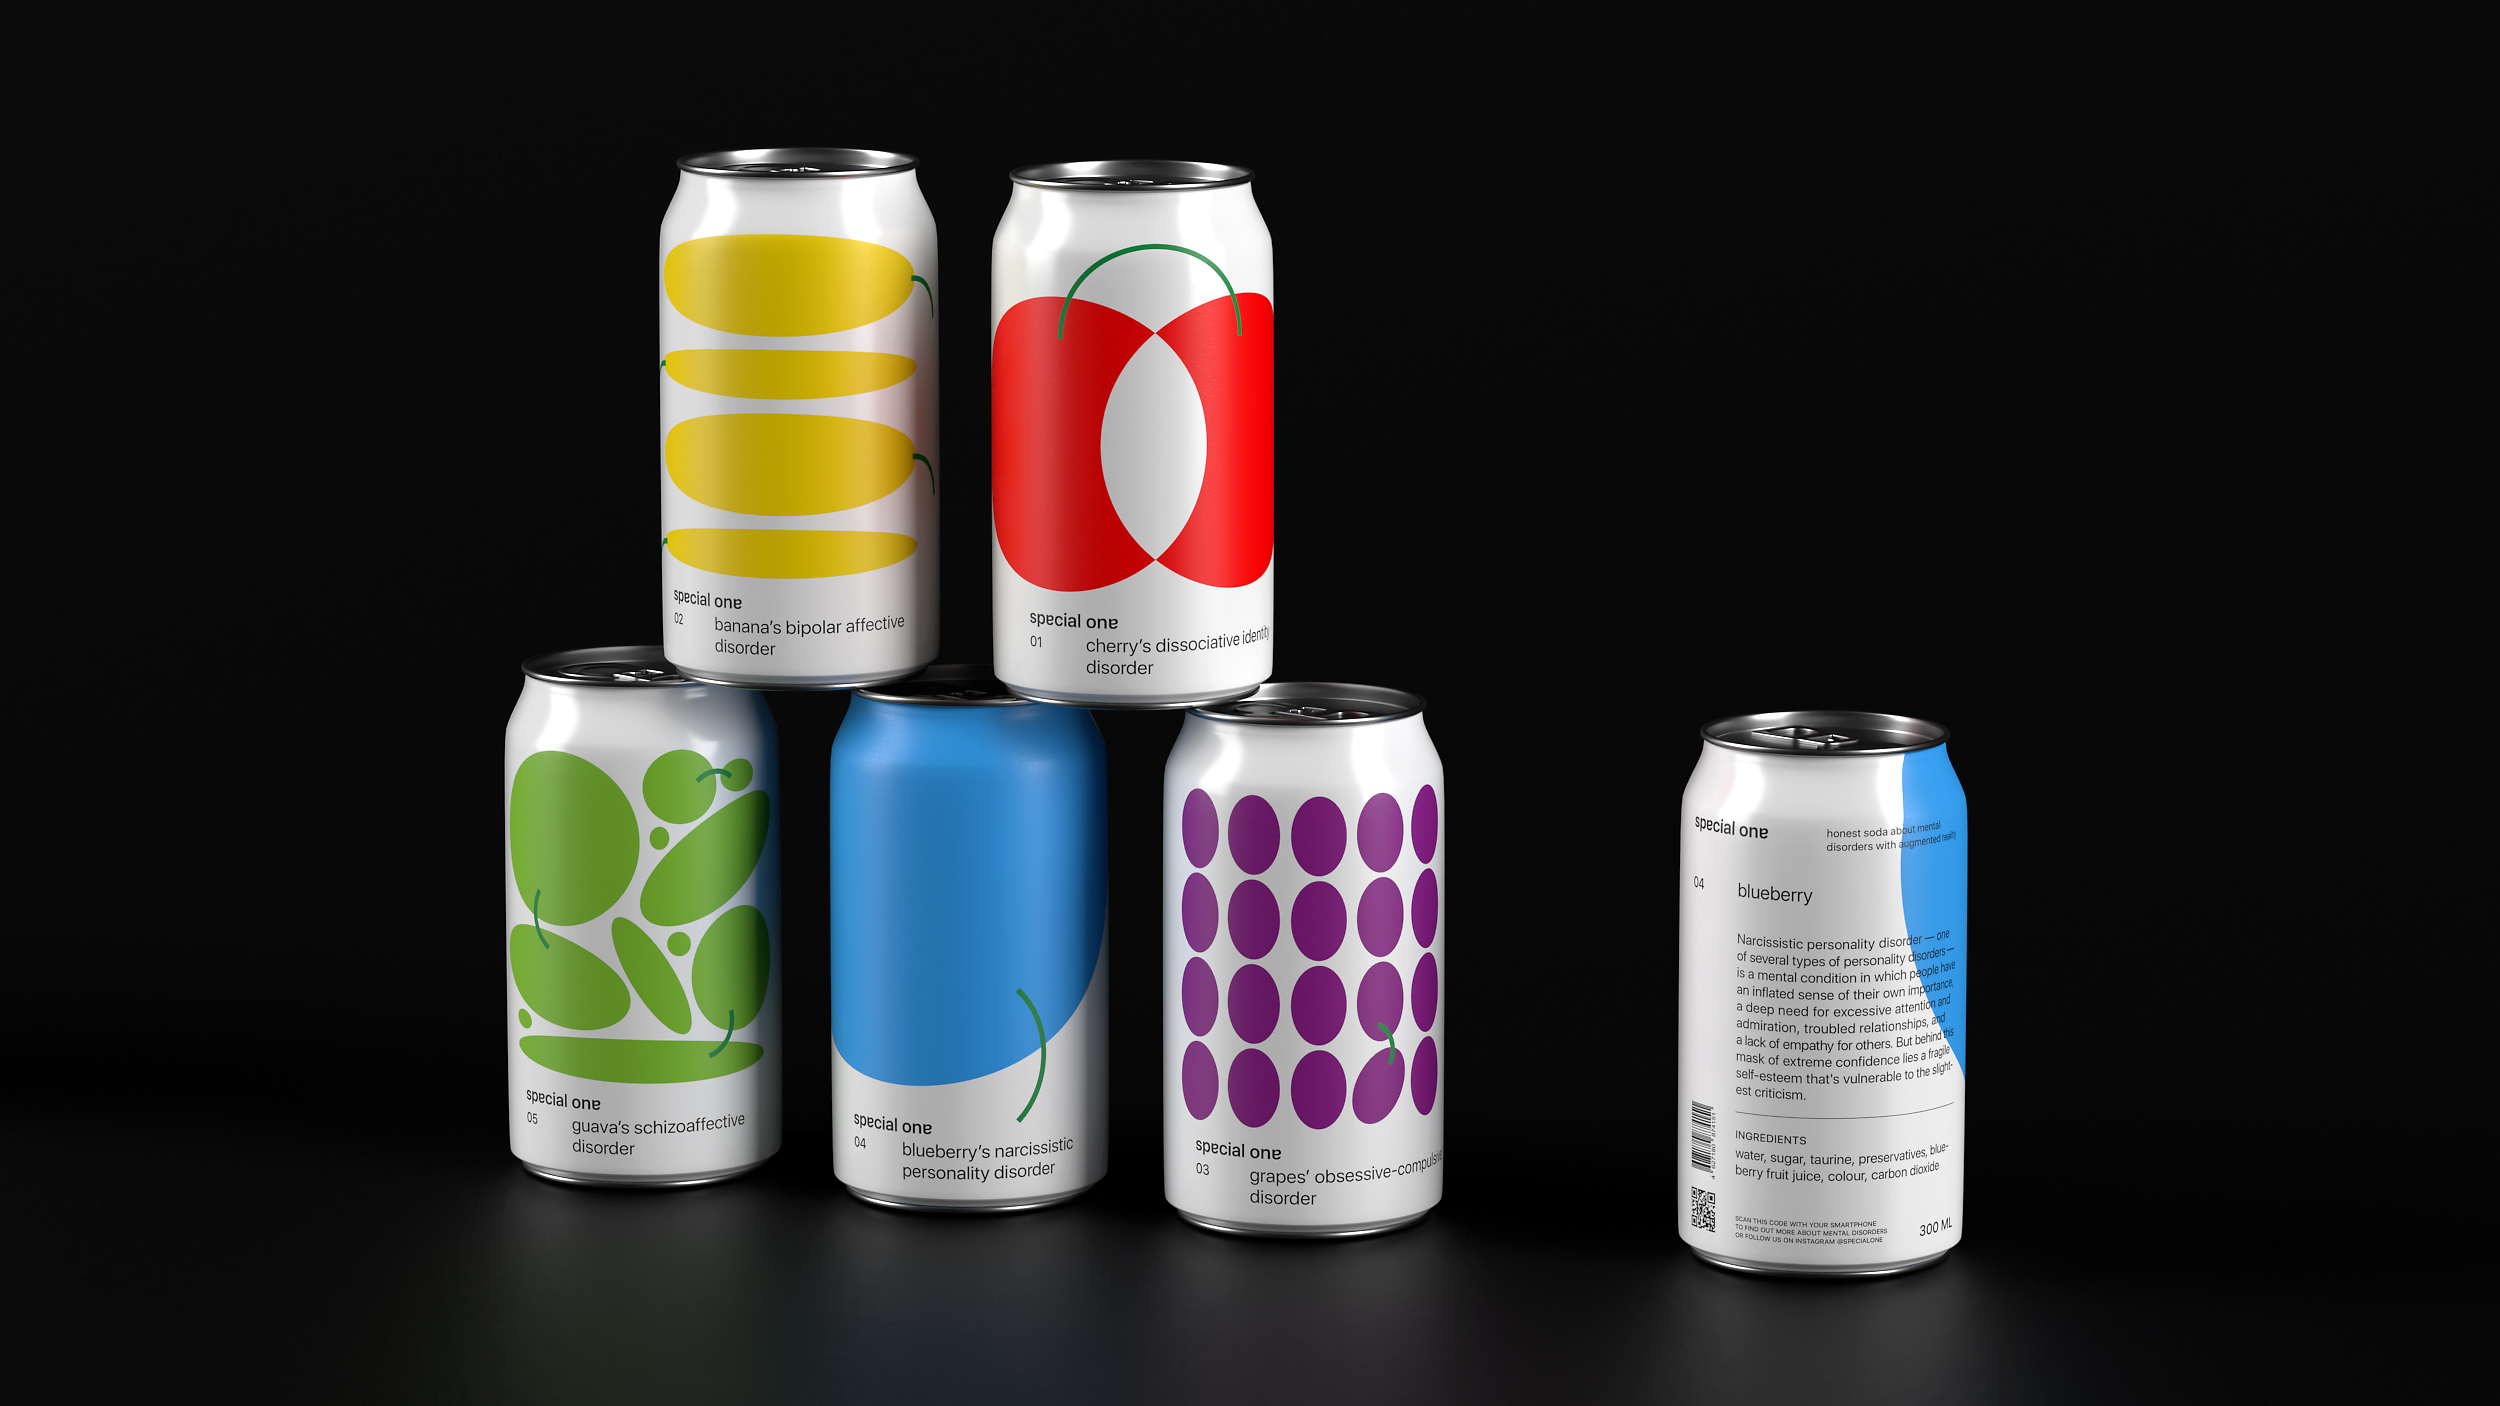 An Honest Soda About Mental Disorders Created by Student Gosha Chubukin